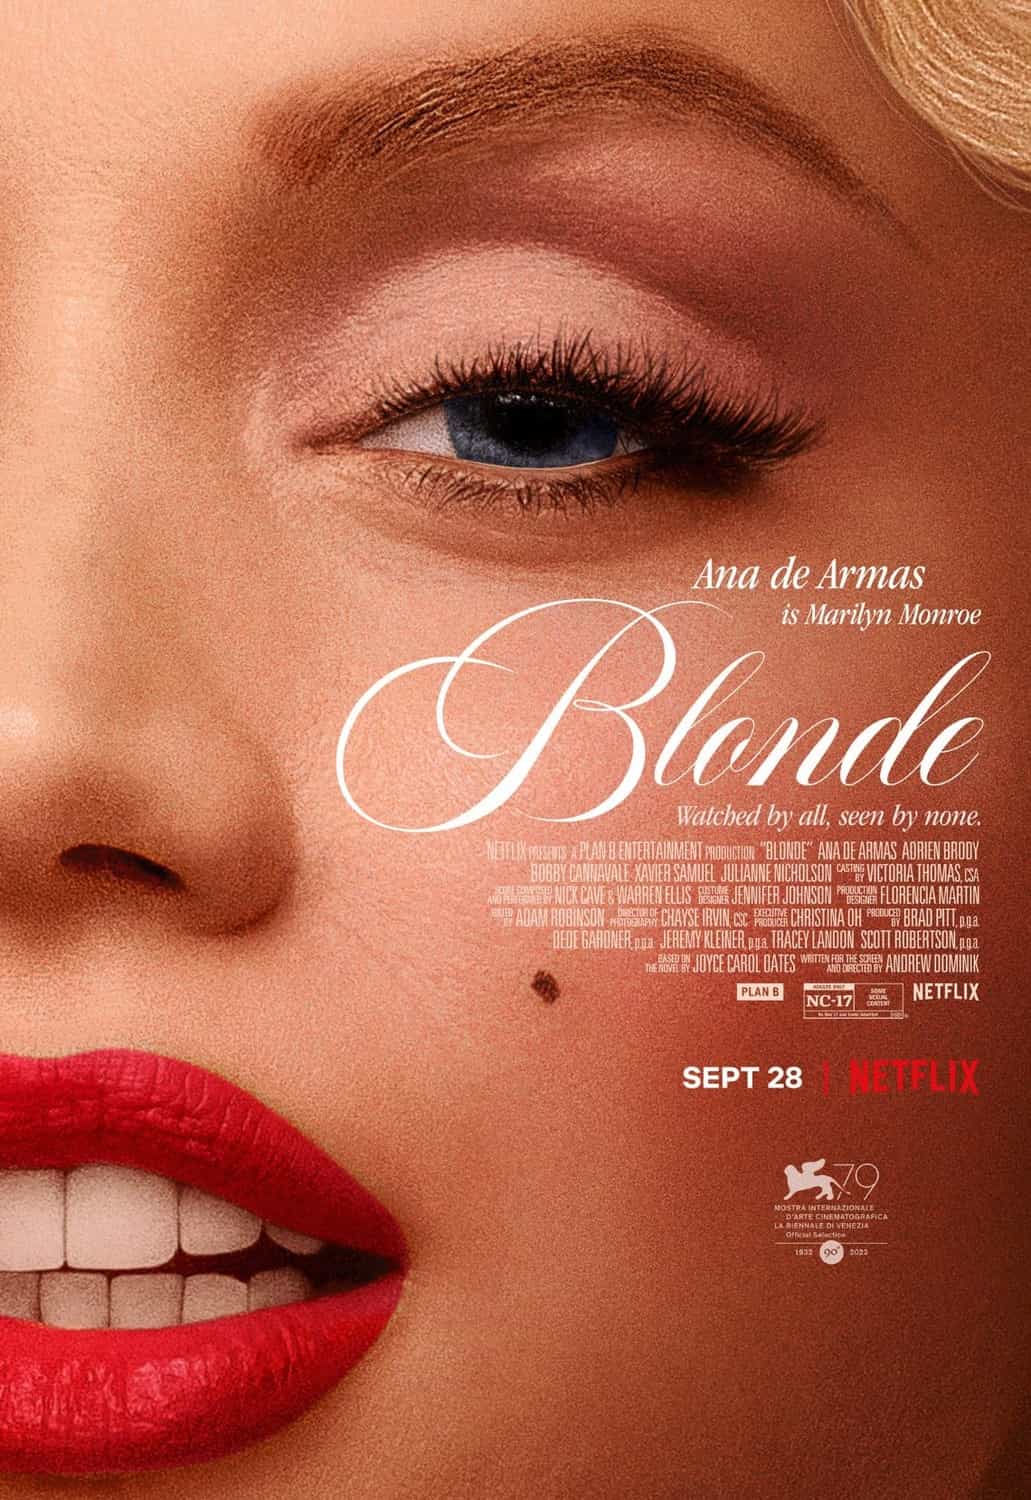 First trailer and poster for Blonde starring Ana de Armas - released in the UK in 2022 #blonde